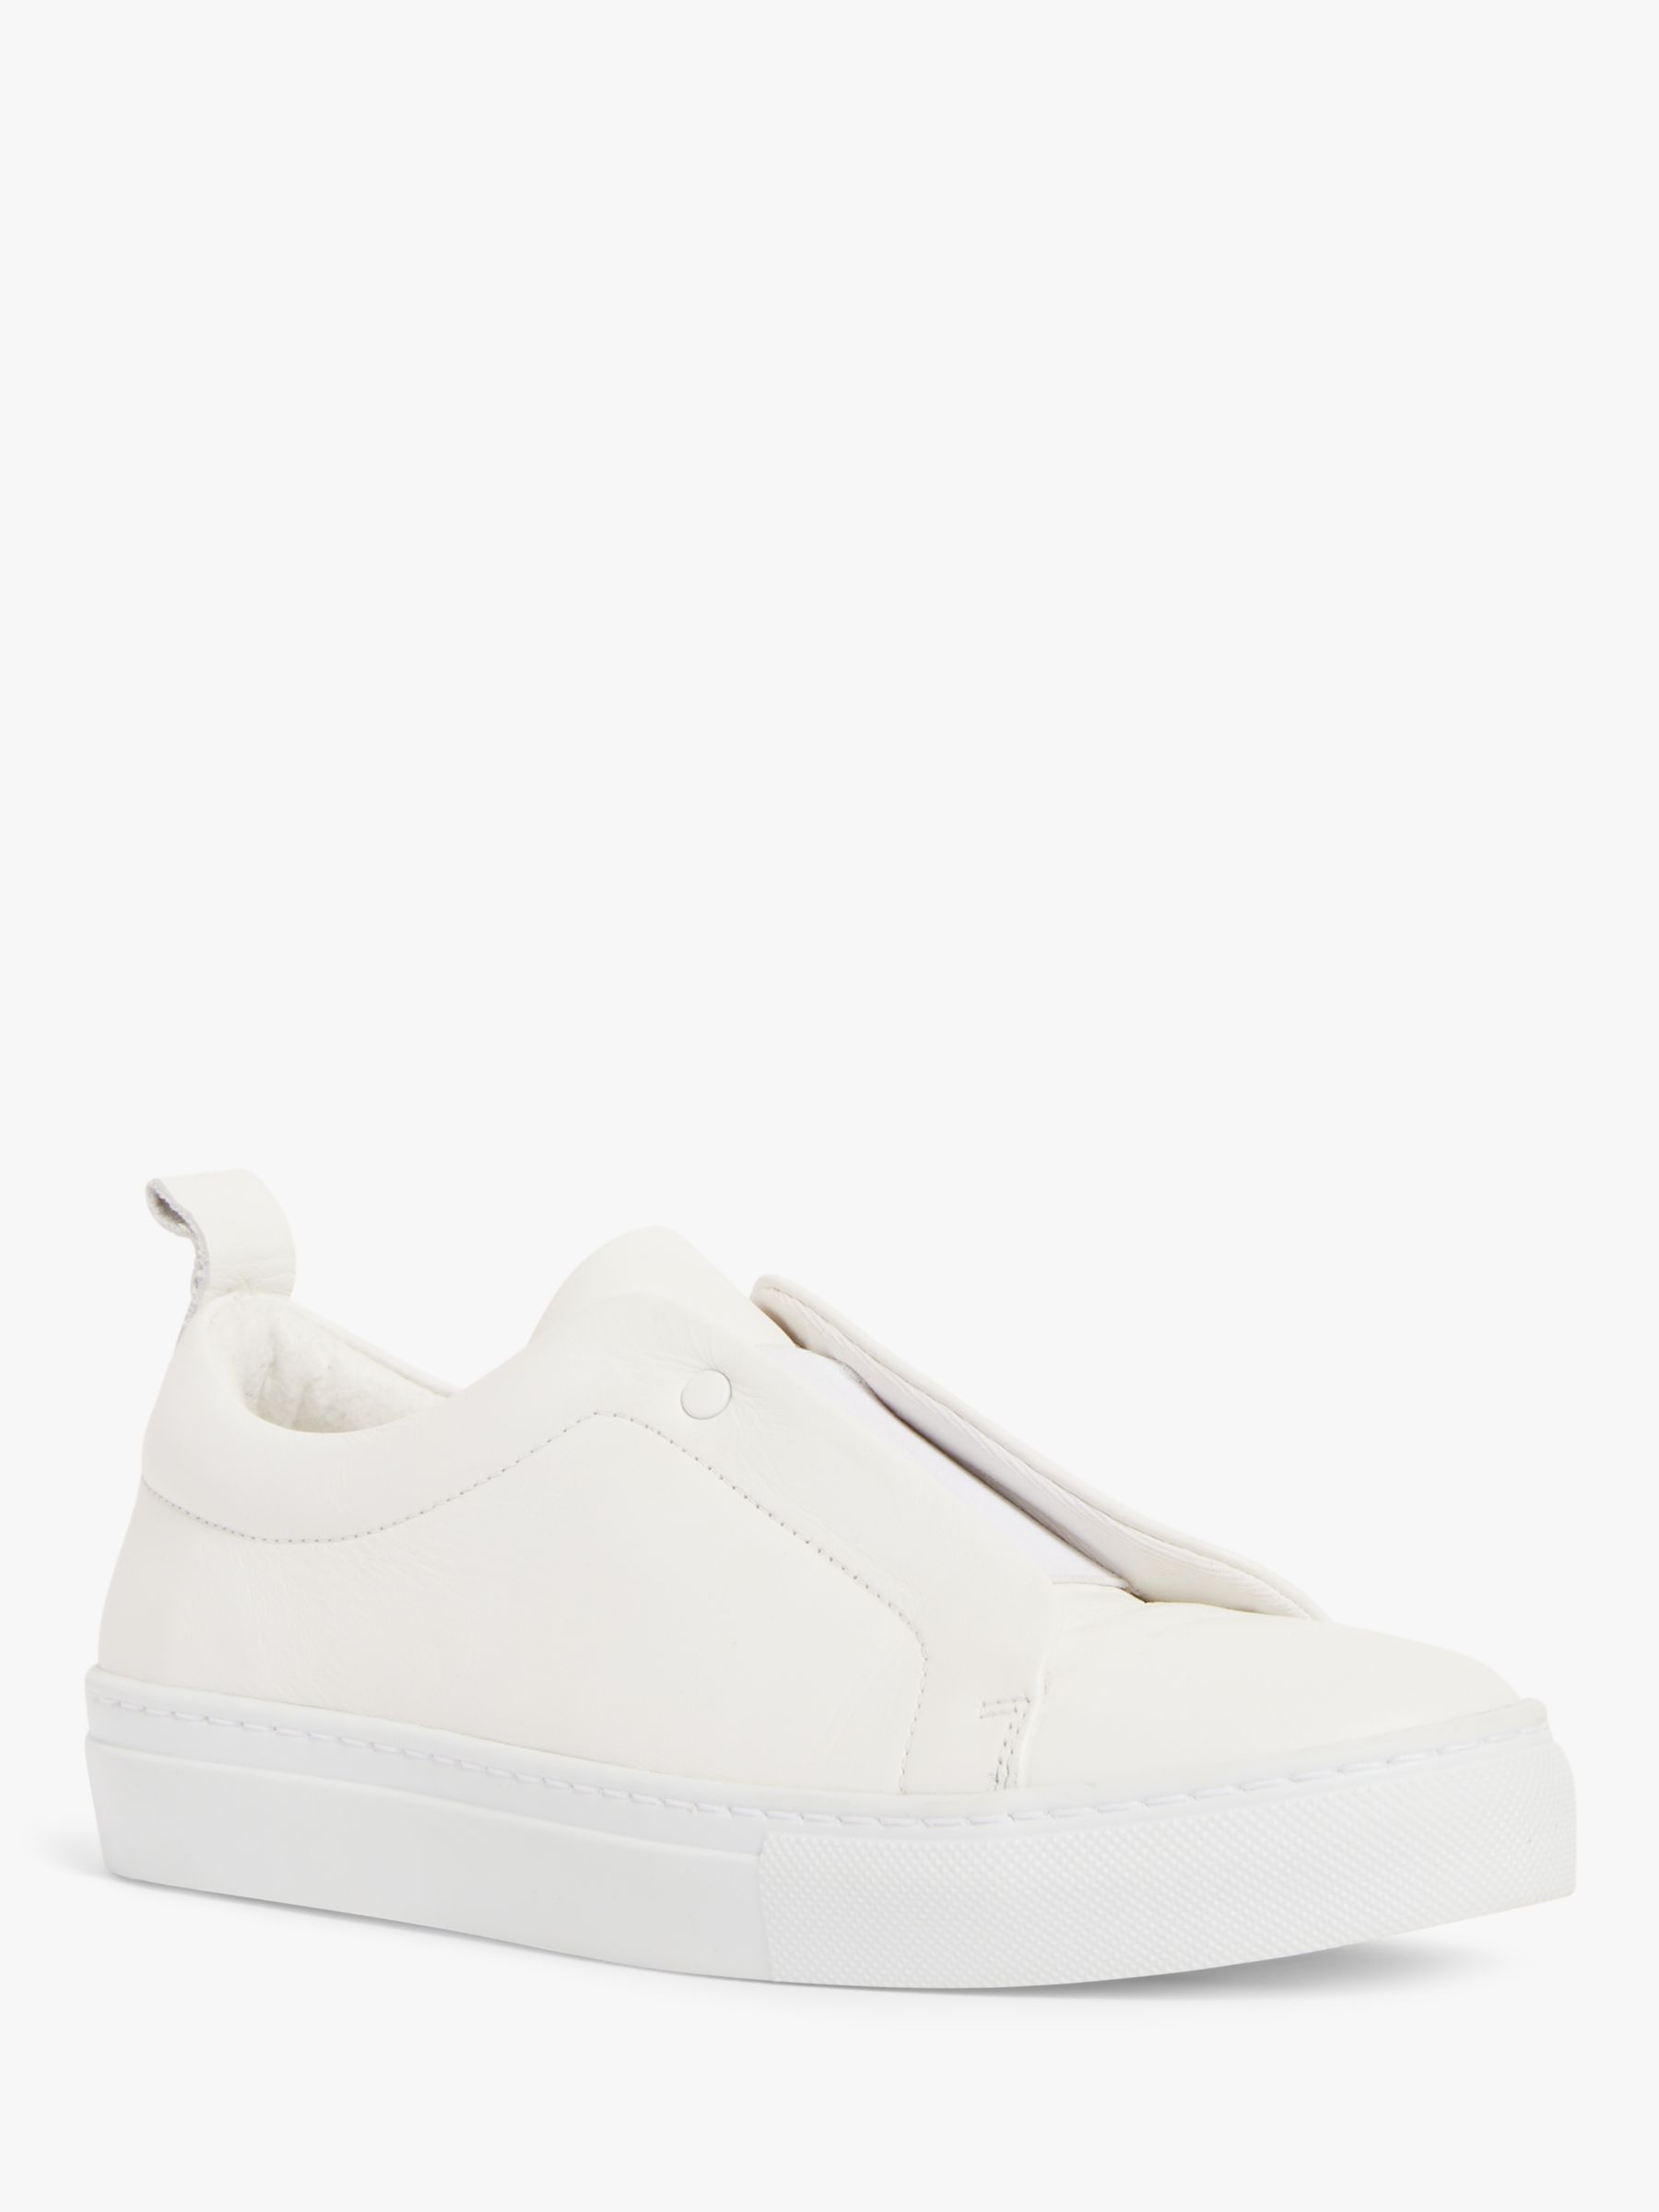 Kin New Enni Leather Slip On Trainers, Off White at John Lewis & Partners